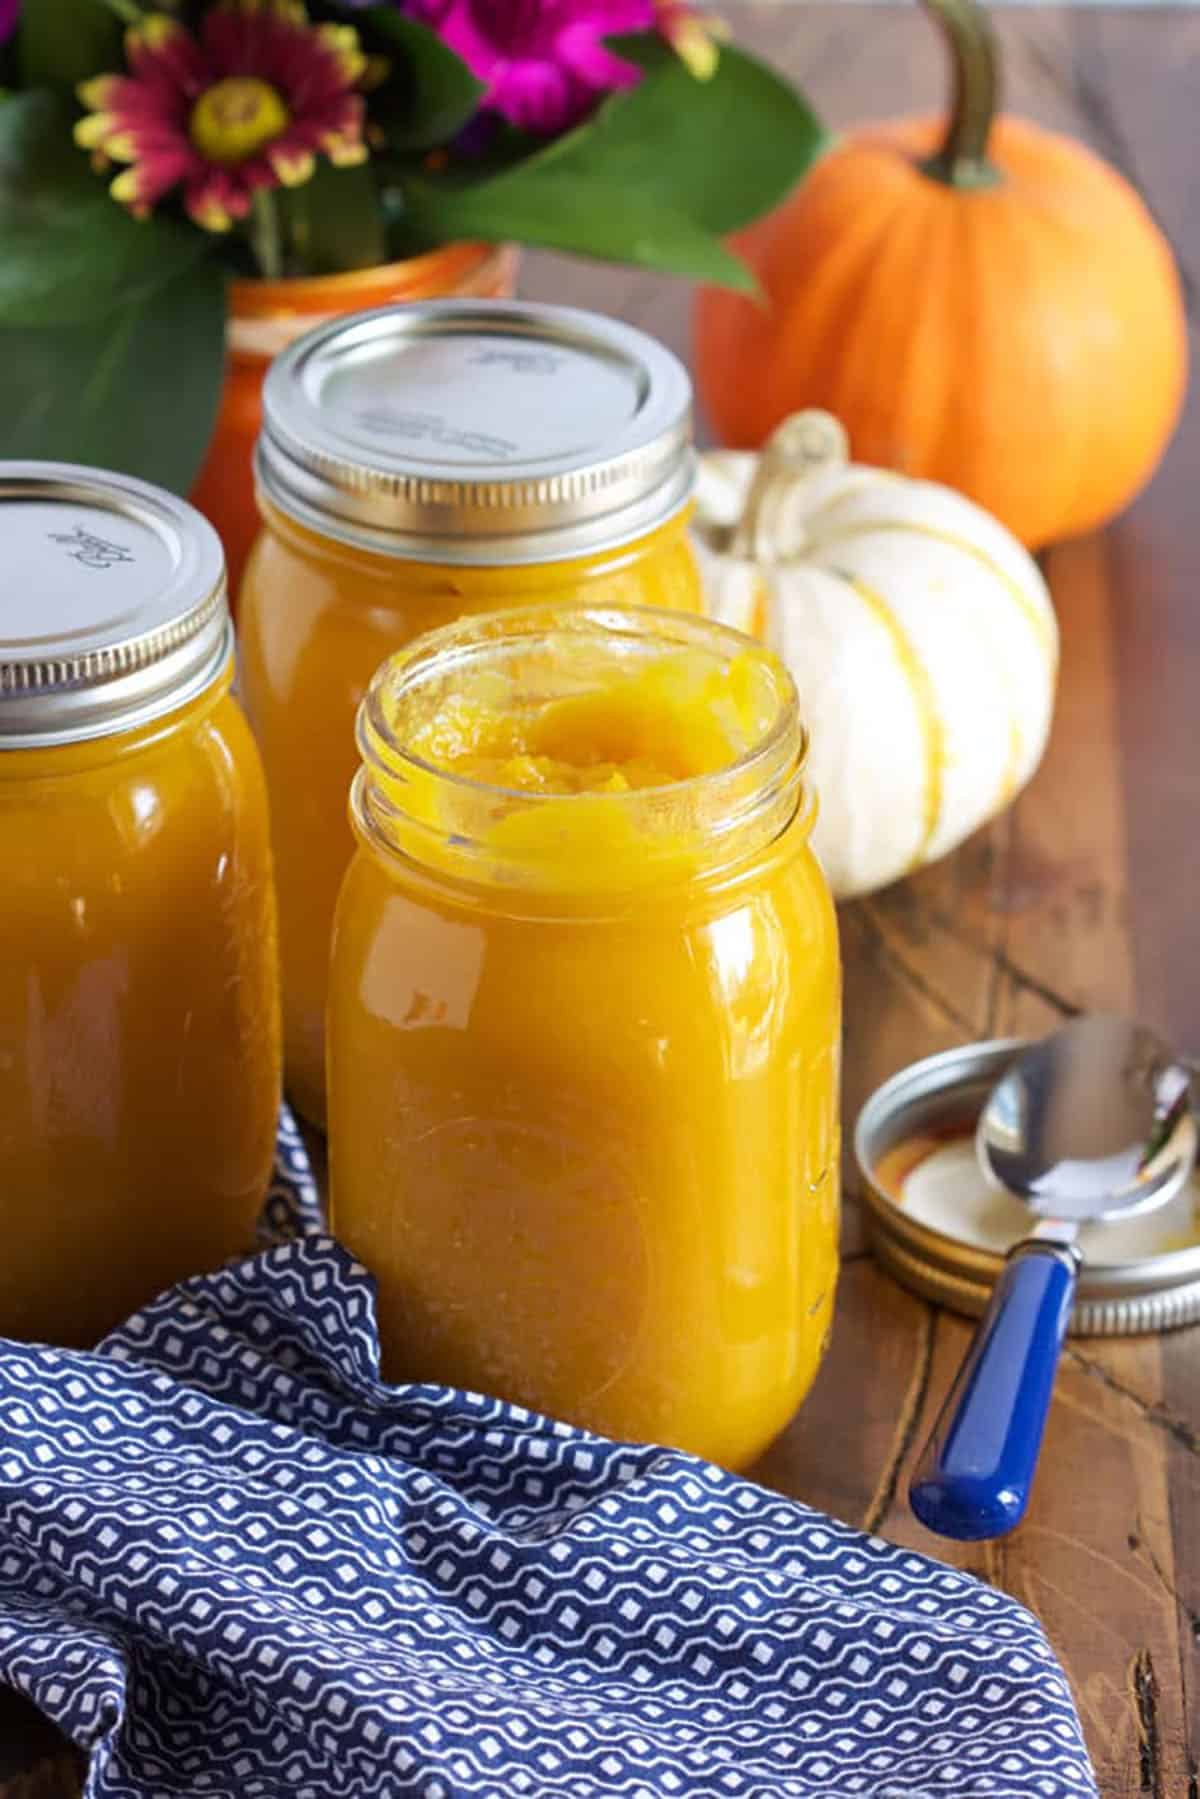 Pumpkin Puree in a ball jar with a blue and white napkin and flowers in the background.